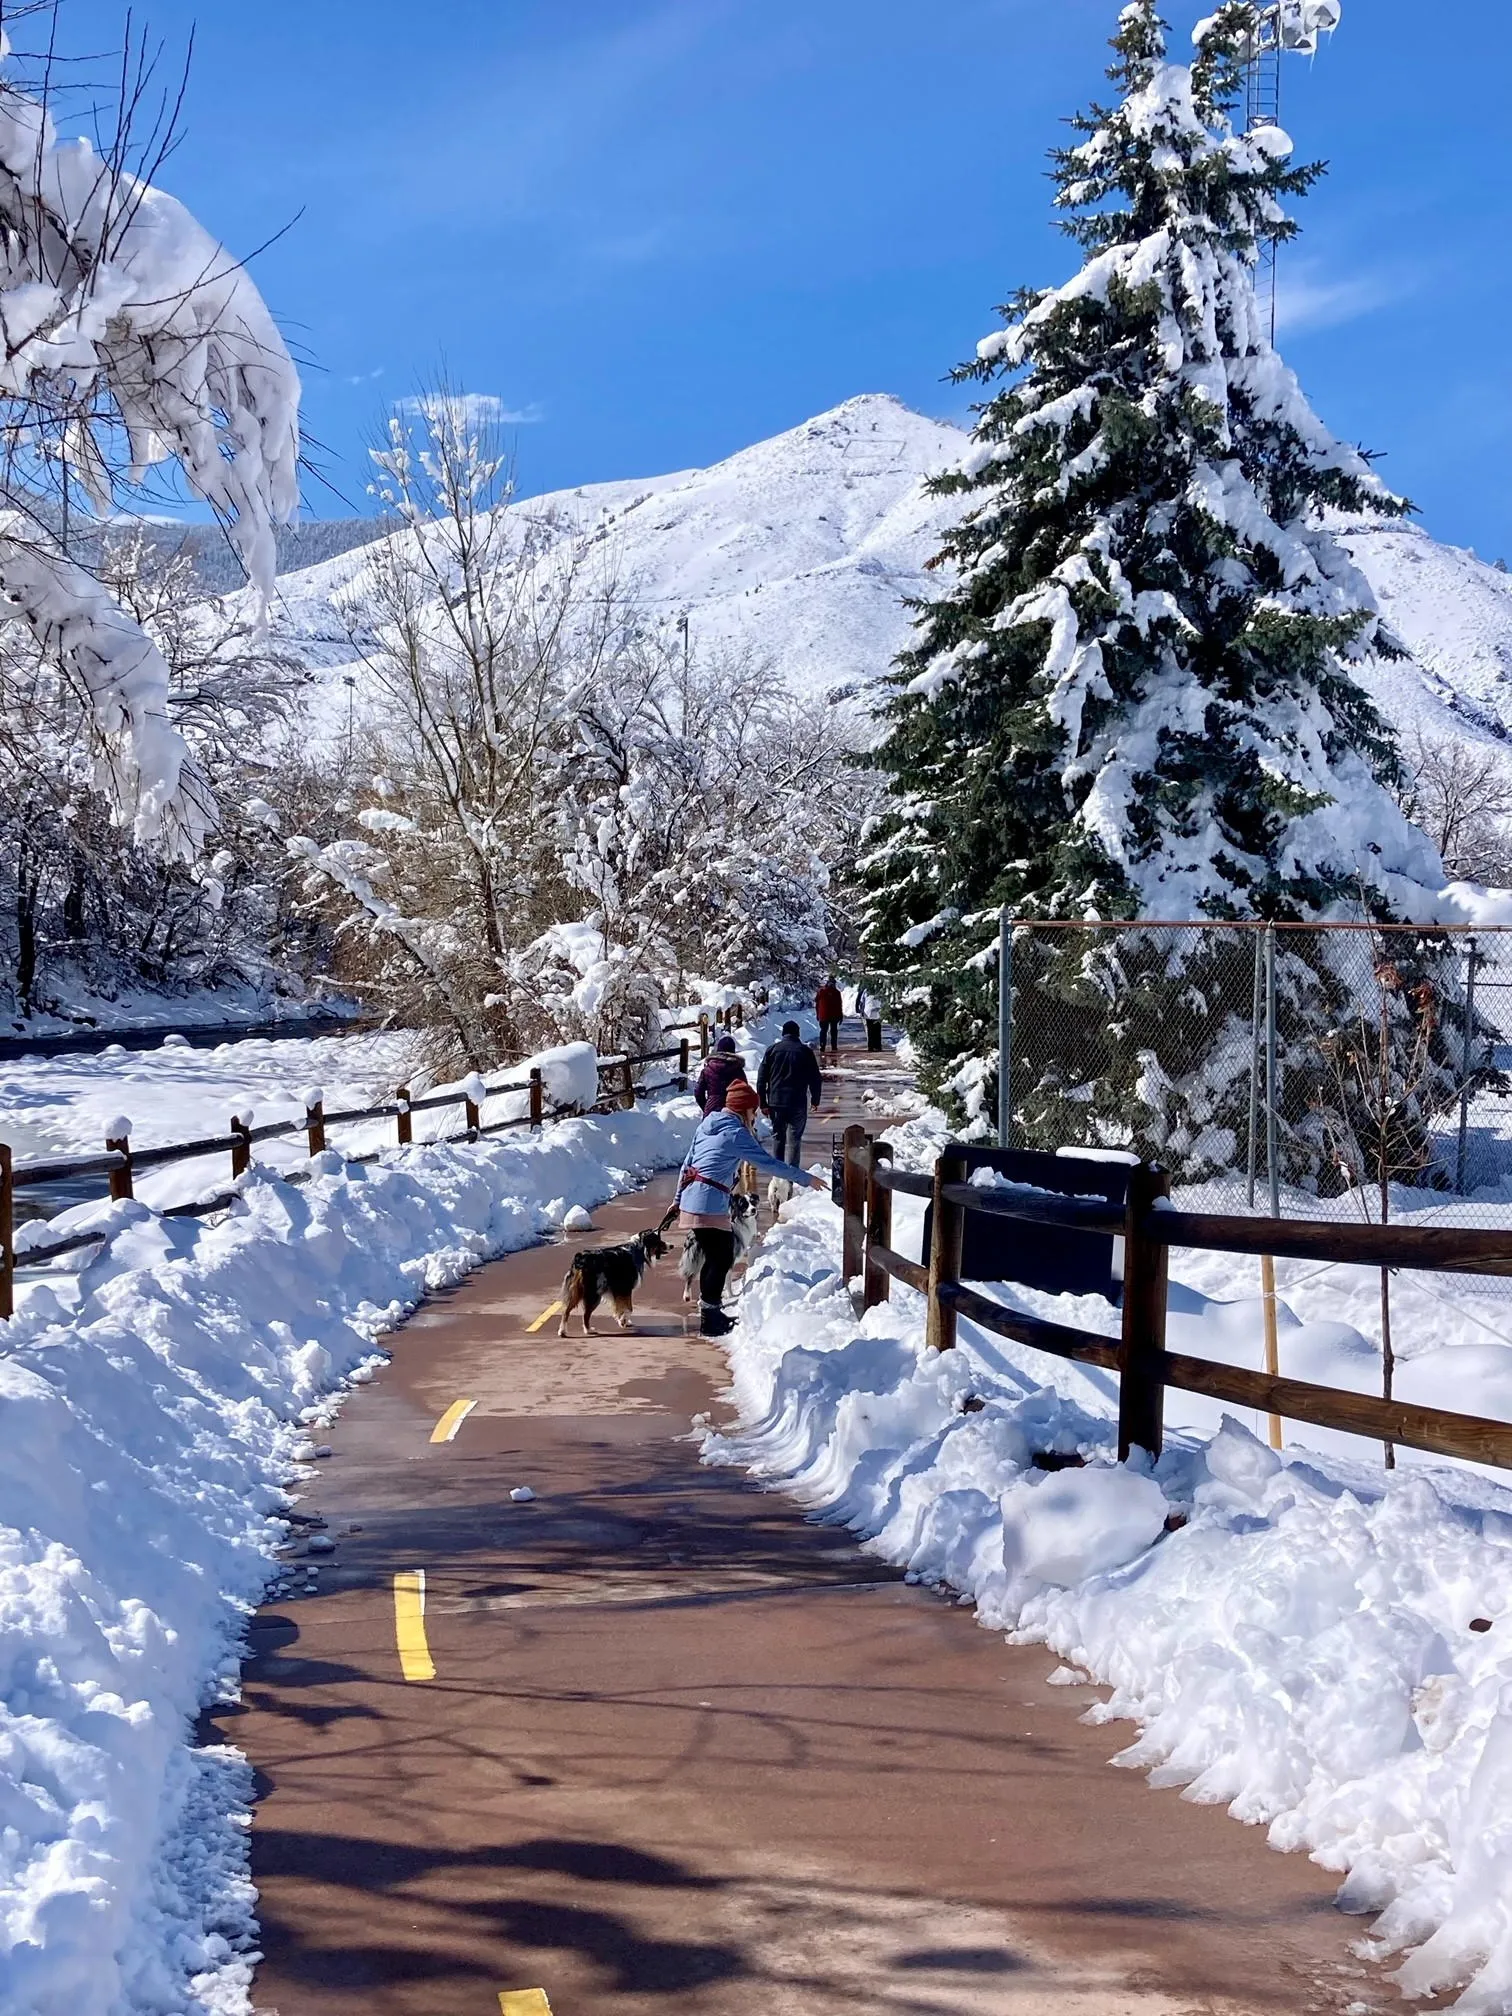 Three people and a dog on the Clear Creek trail, snow piled on either side, Mt. Zion in the distance.